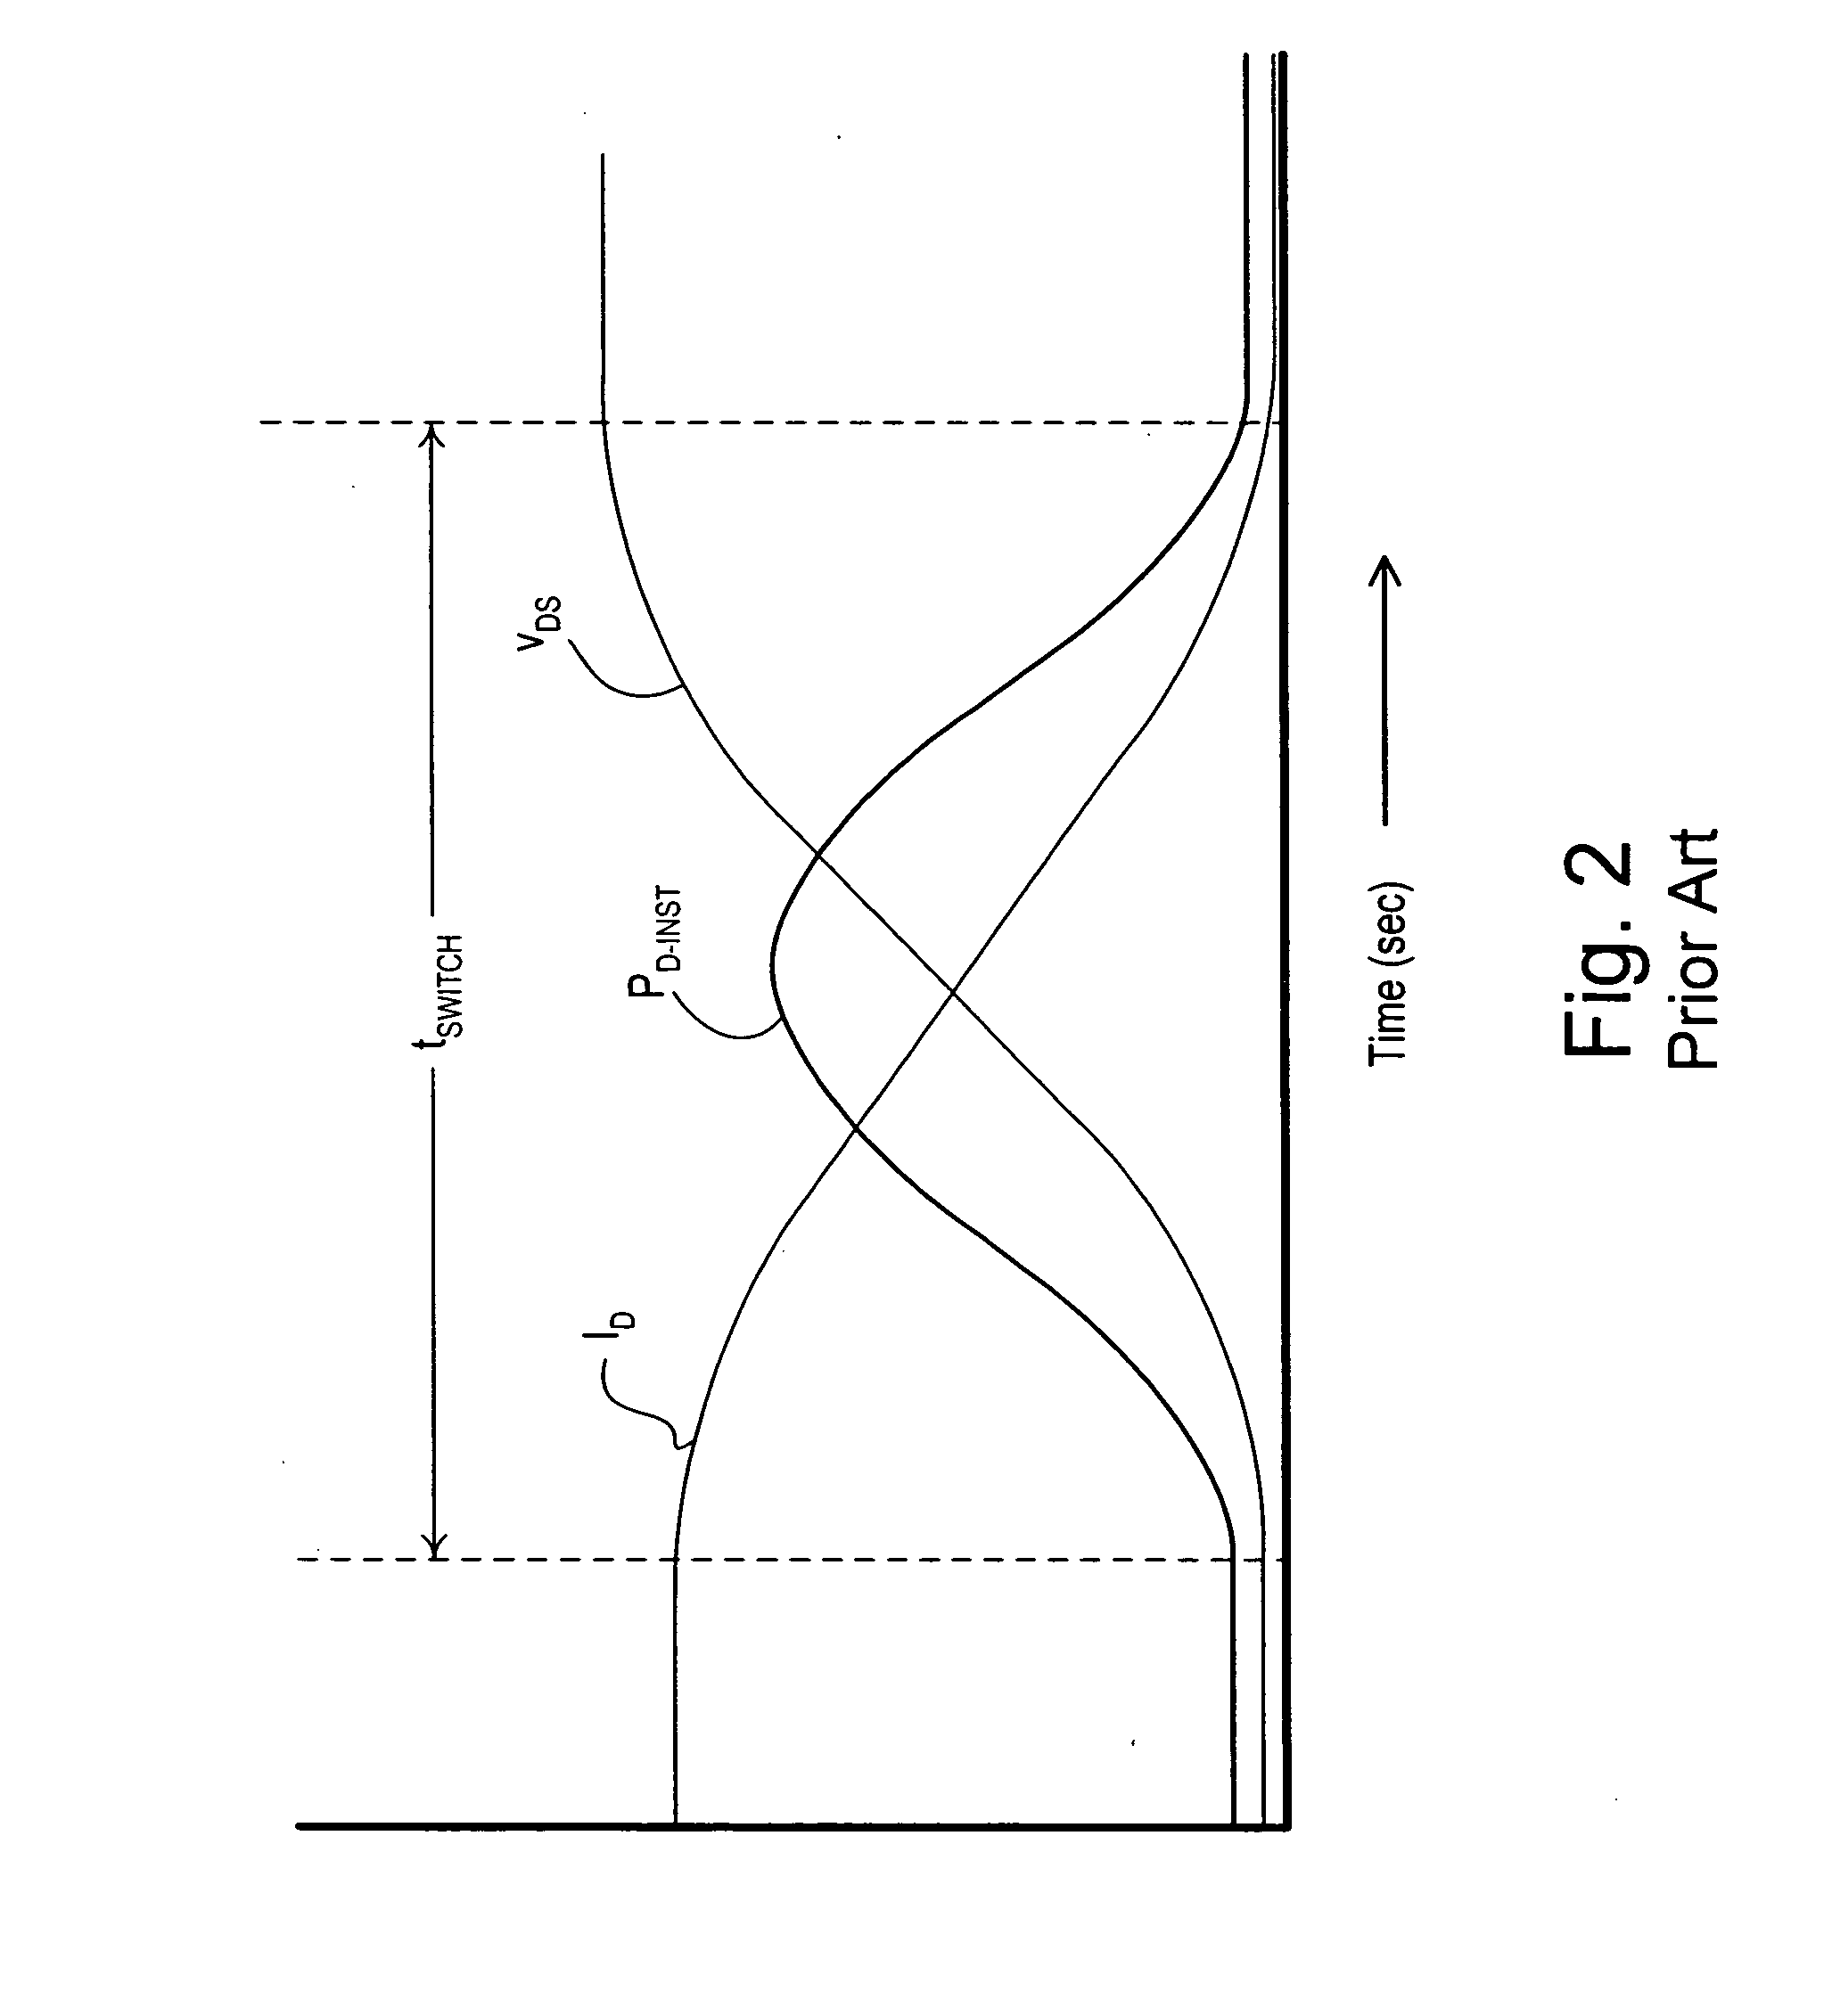 Load control device having a variable drive circuit